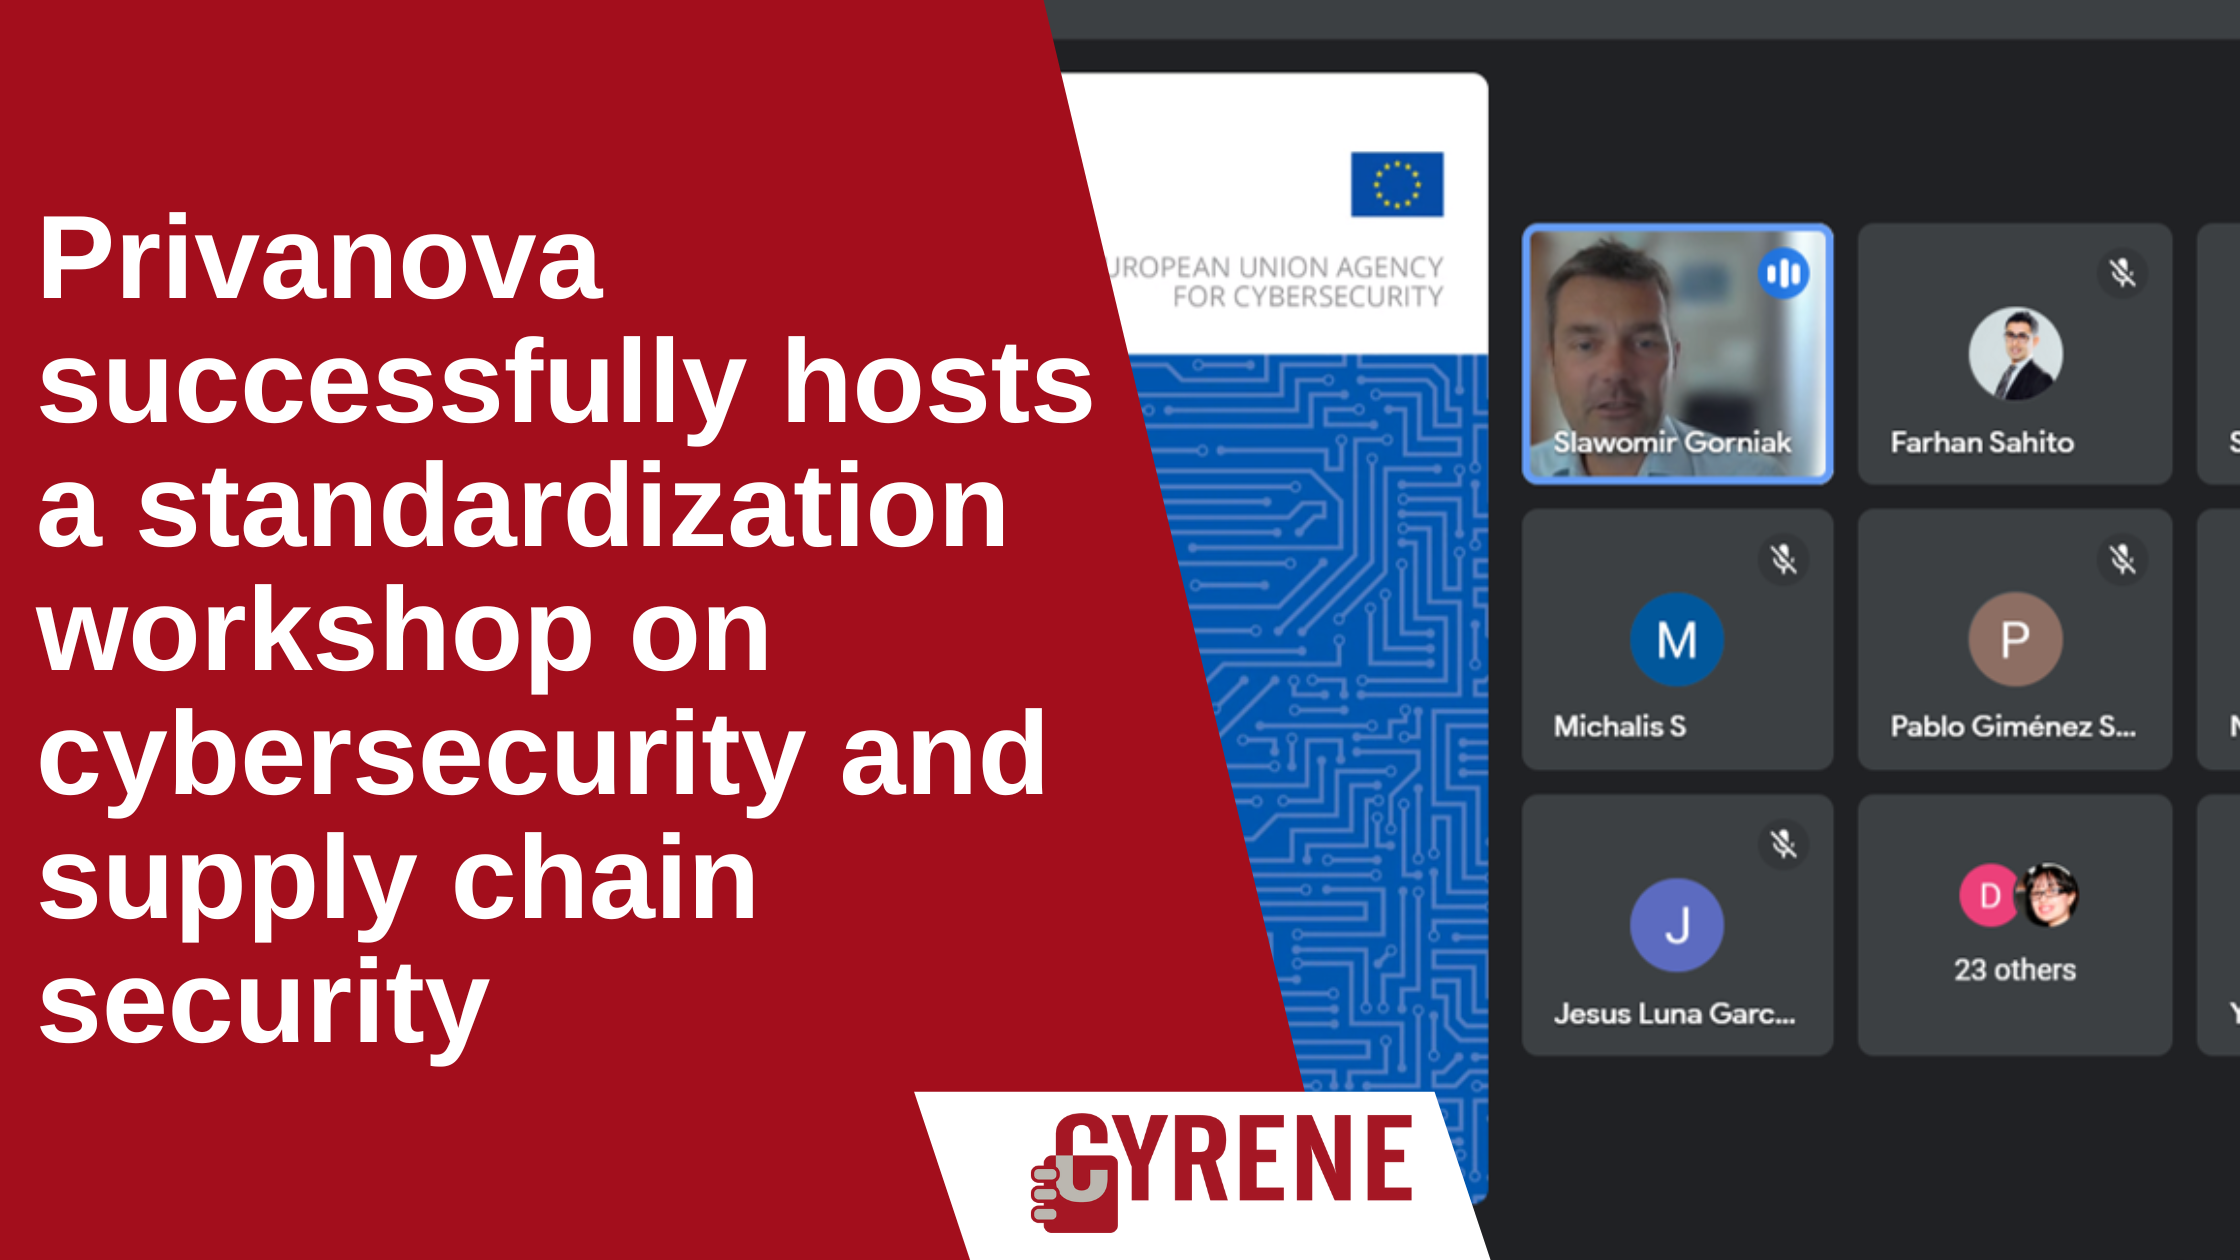 You are currently viewing PRIVANOVA successfully hosts standardization workshop on cybersecurity and supply chain security